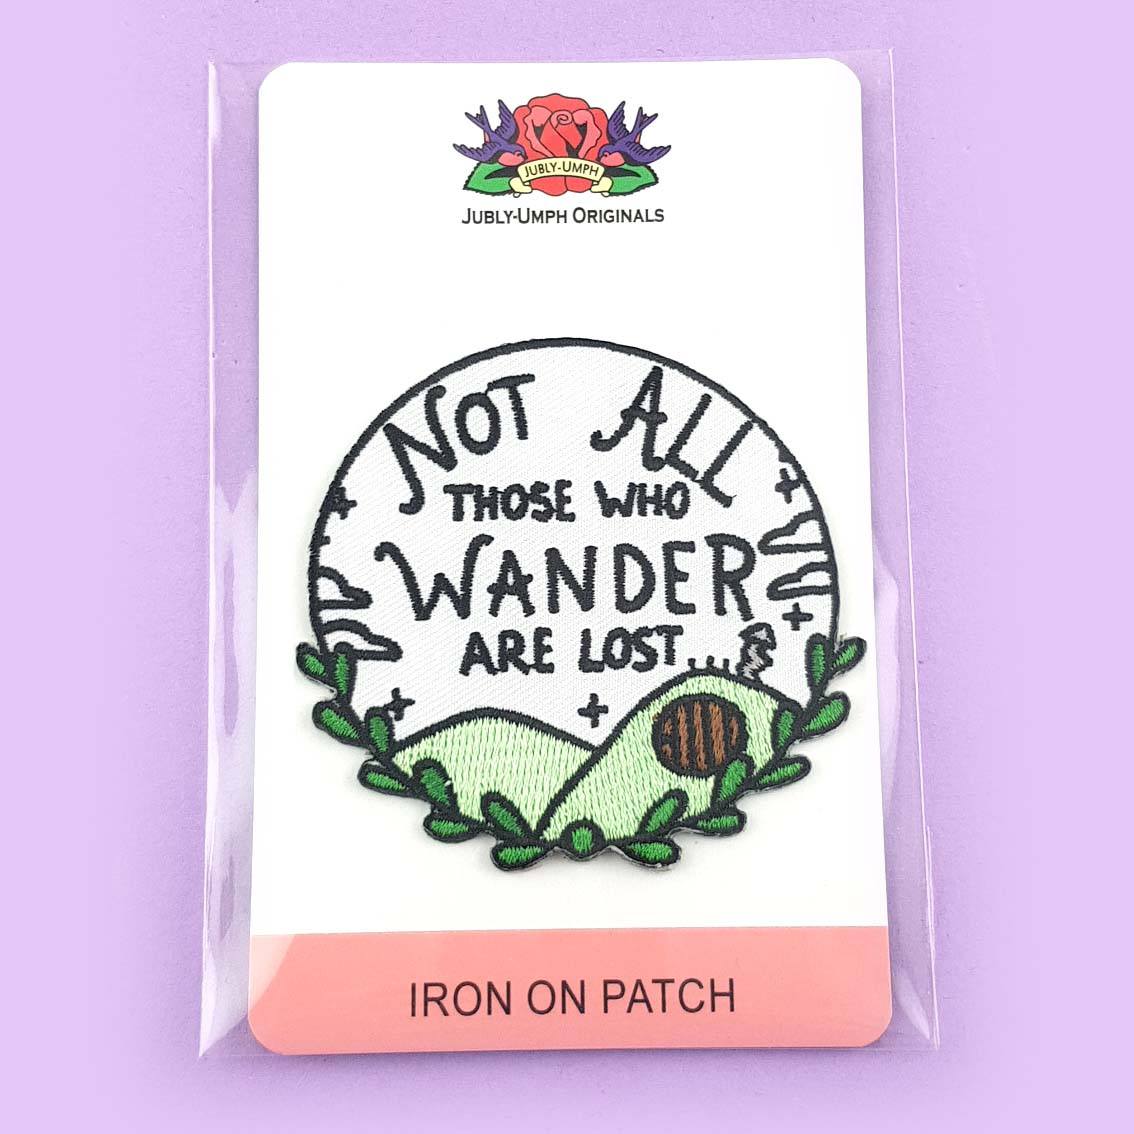 JUBLY-UMPH -  NOT ALL THOSE WHO WANDER ARE LOST EMBROIDERED PATCH